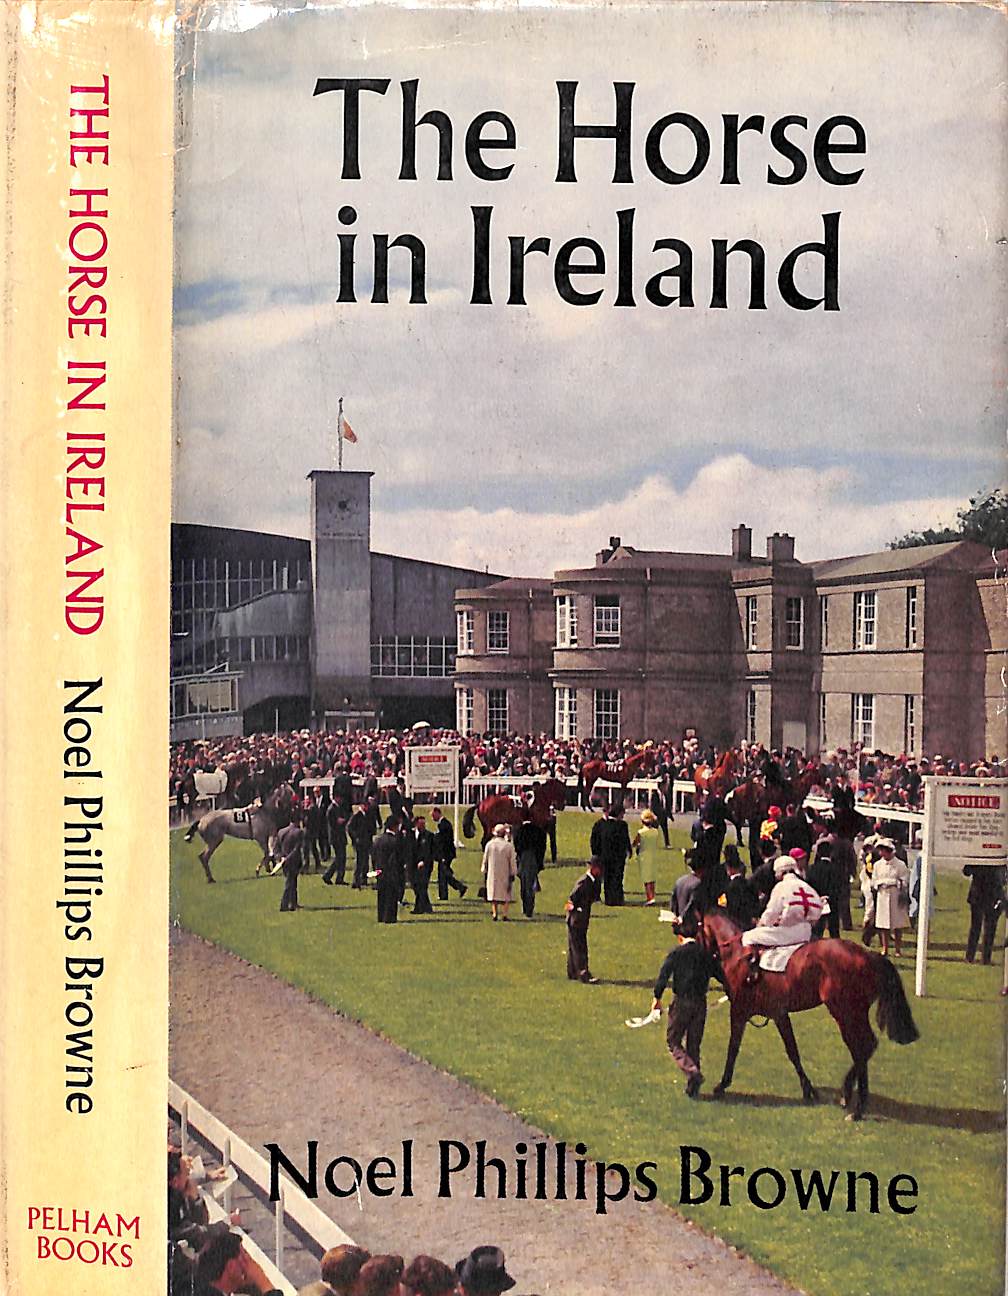 "The Horse In Ireland" 1967 BROWNE, Noel Phillips [edited by]